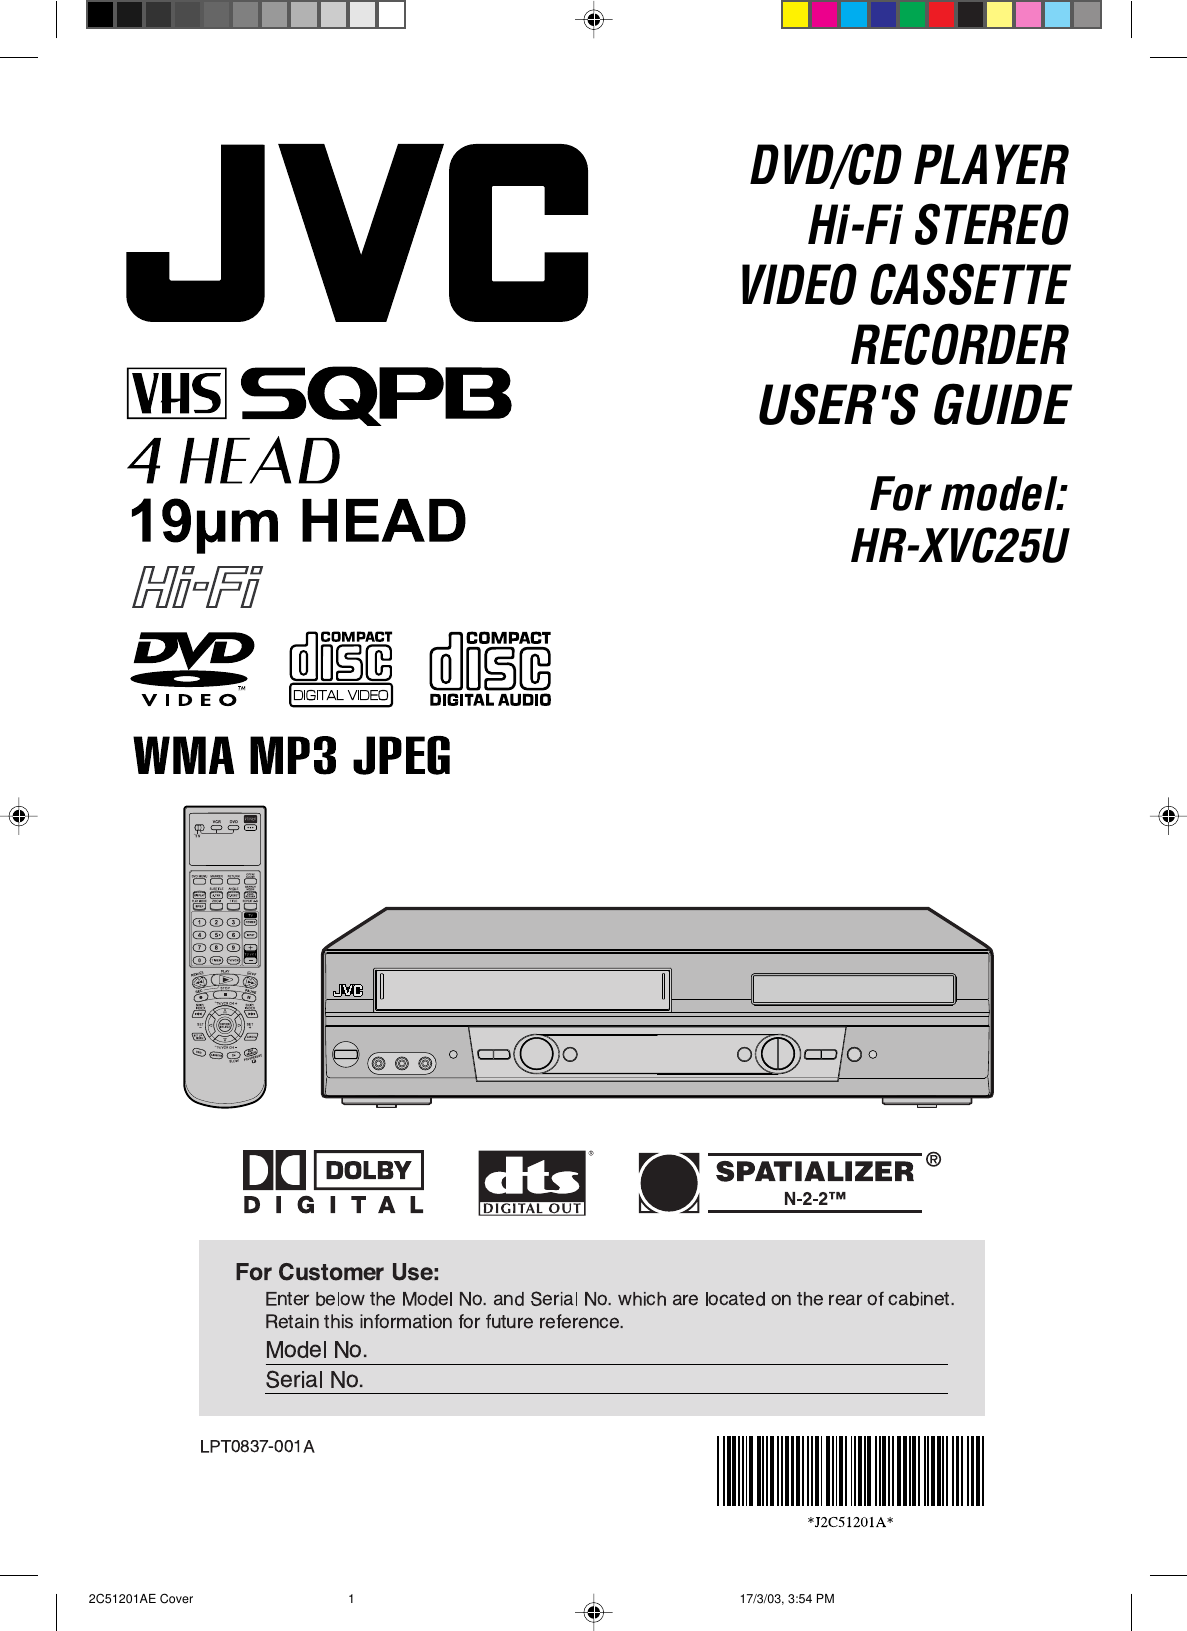 For model:HR-XVC25UDVD/CD PLAYERHi-Fi STEREOVIDEO CASSETTERECORDERUSER&apos;S GUIDE 2C51201AE Cover 17/3/03, 3:54 PM1